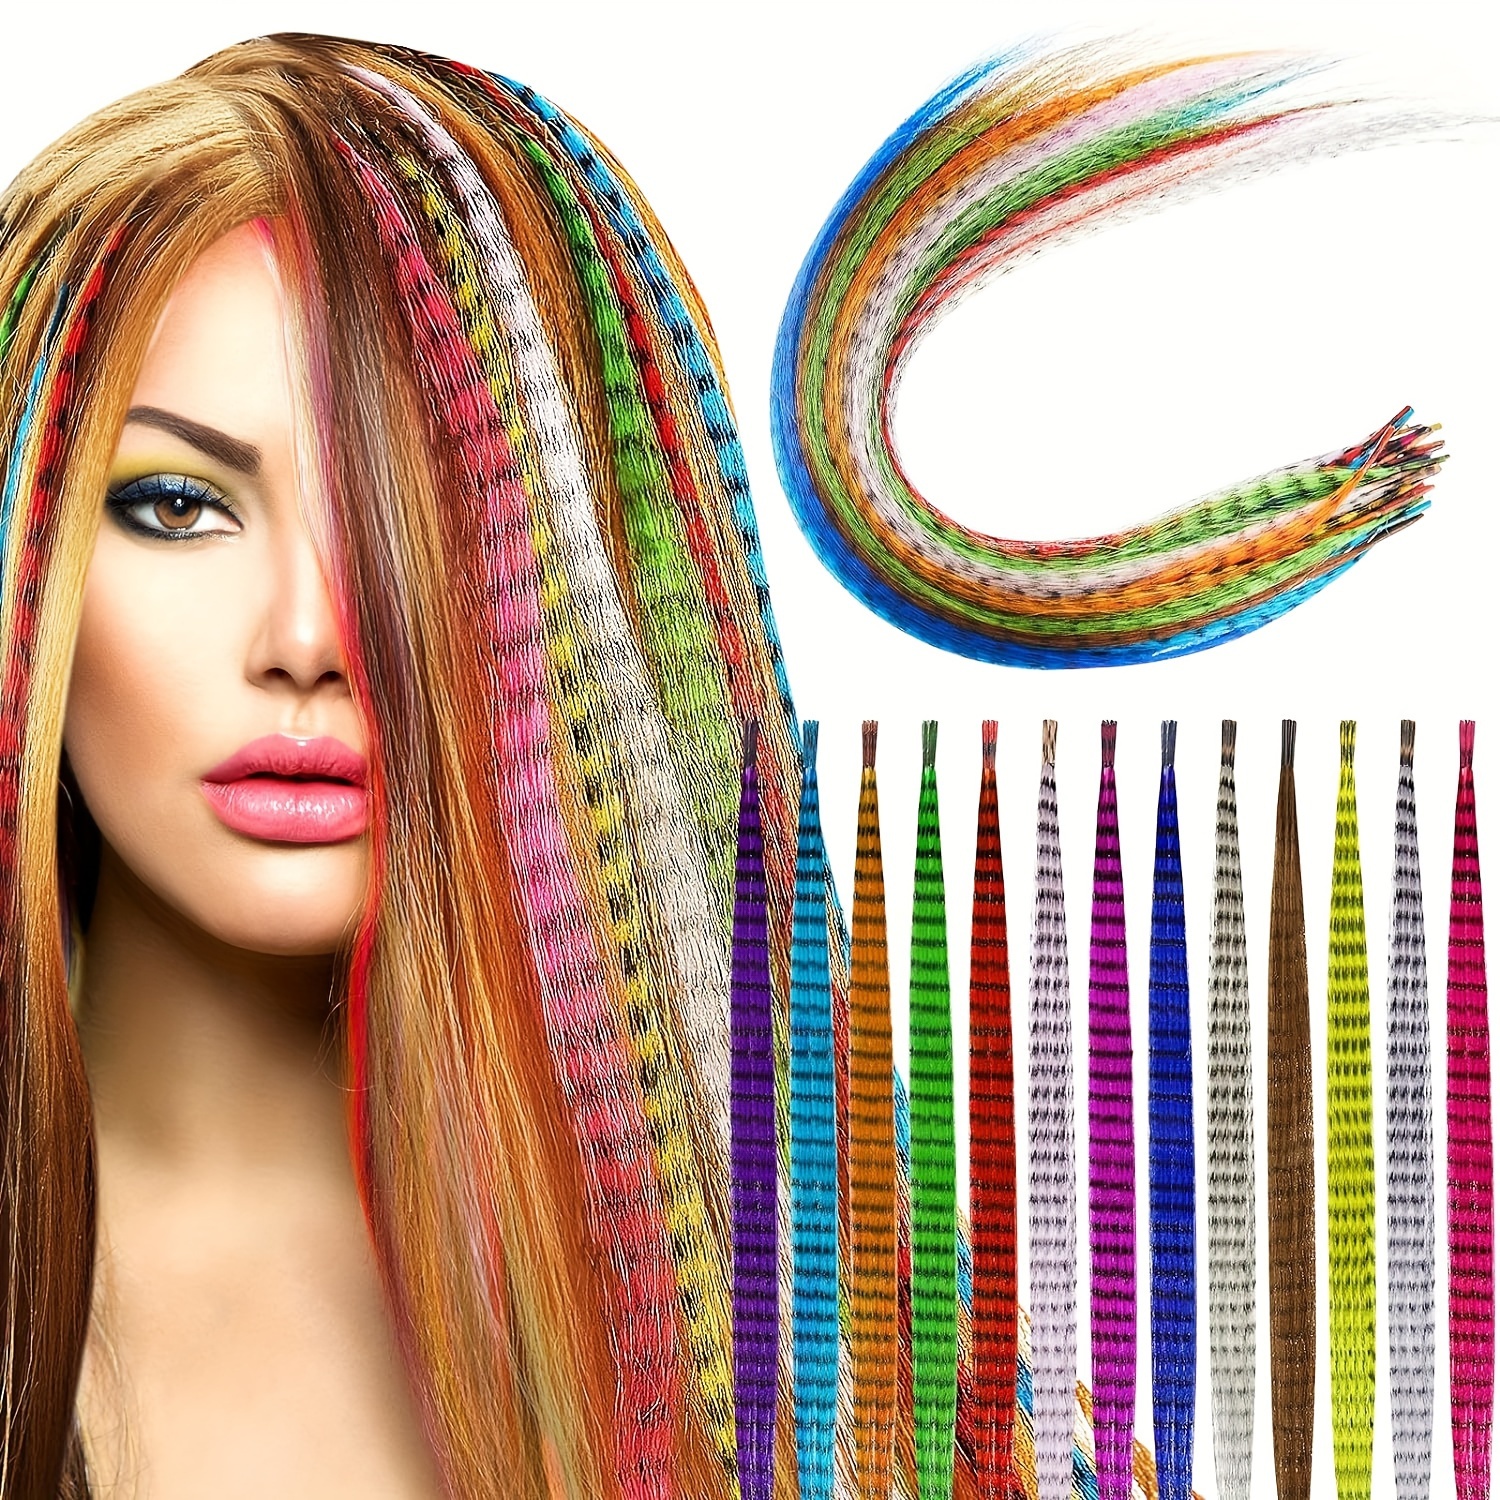 Hippie Hair Accessories Feather Extensions Rainbow Natural Long Feathers for Hair Bling Colorful Gift Rainbow Gifts for Hairdresser x 30